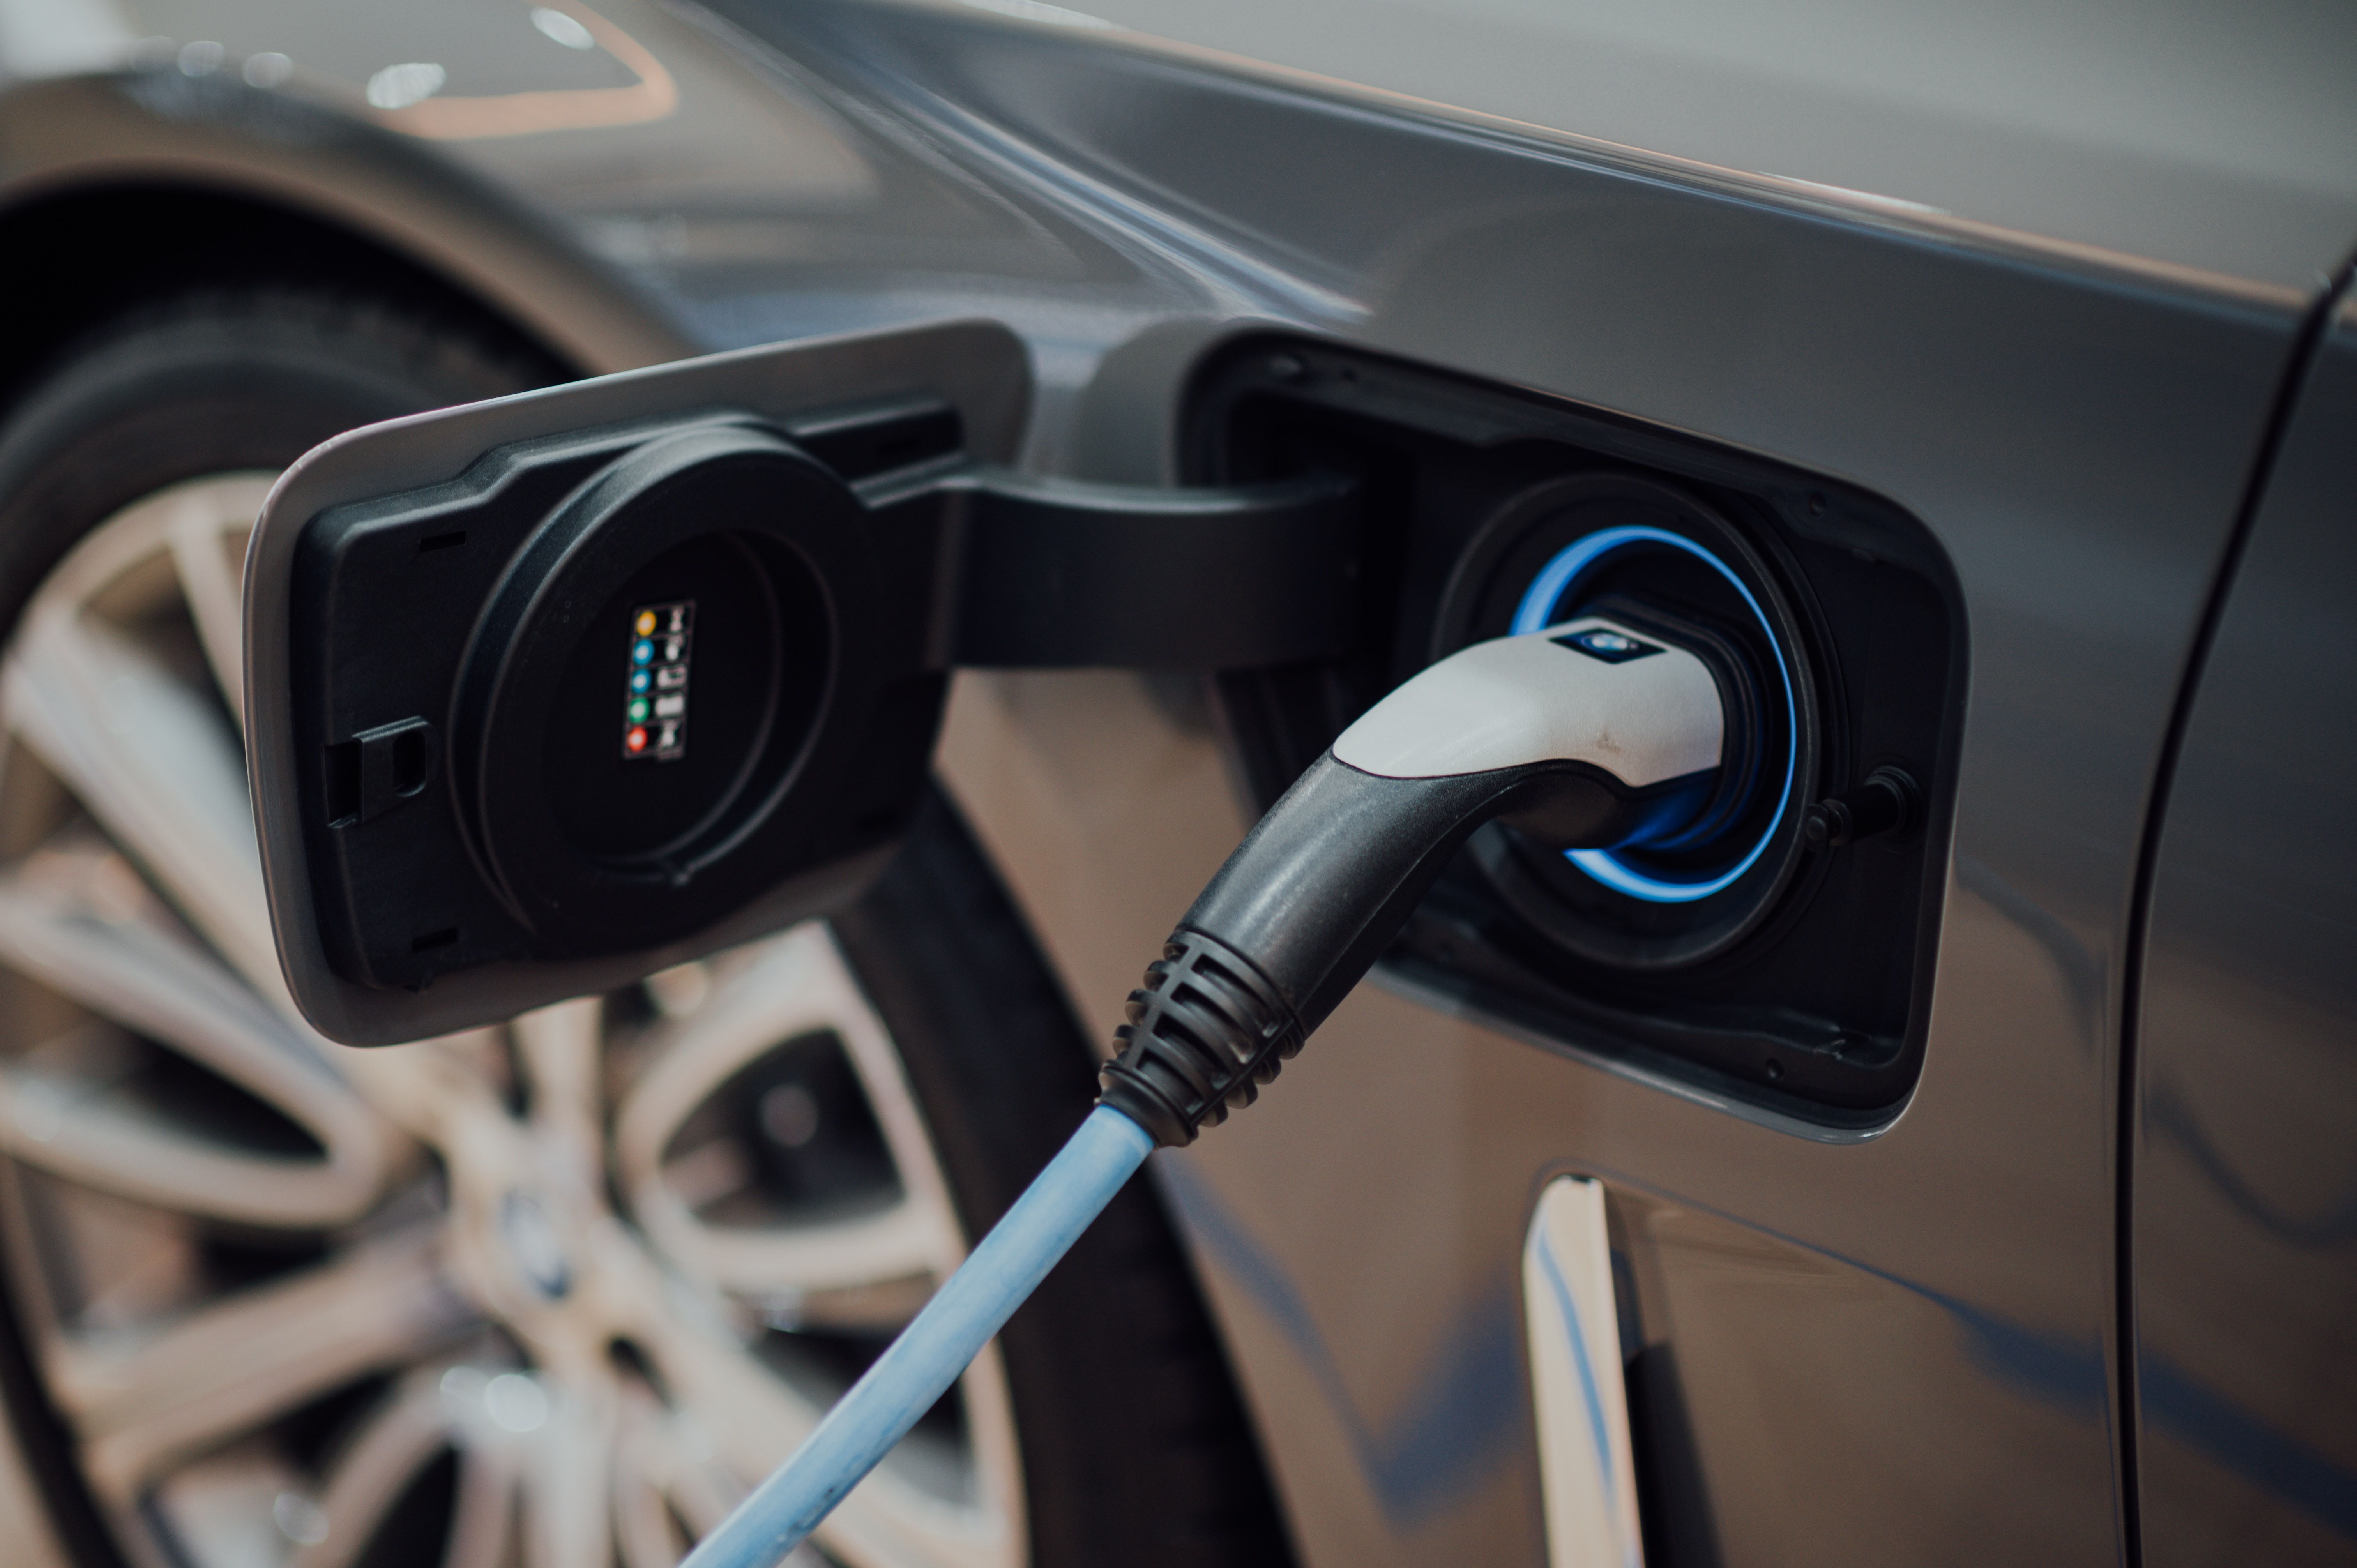 electric vehicle charging station Photo by CHUTTERSNAP on Unsplash